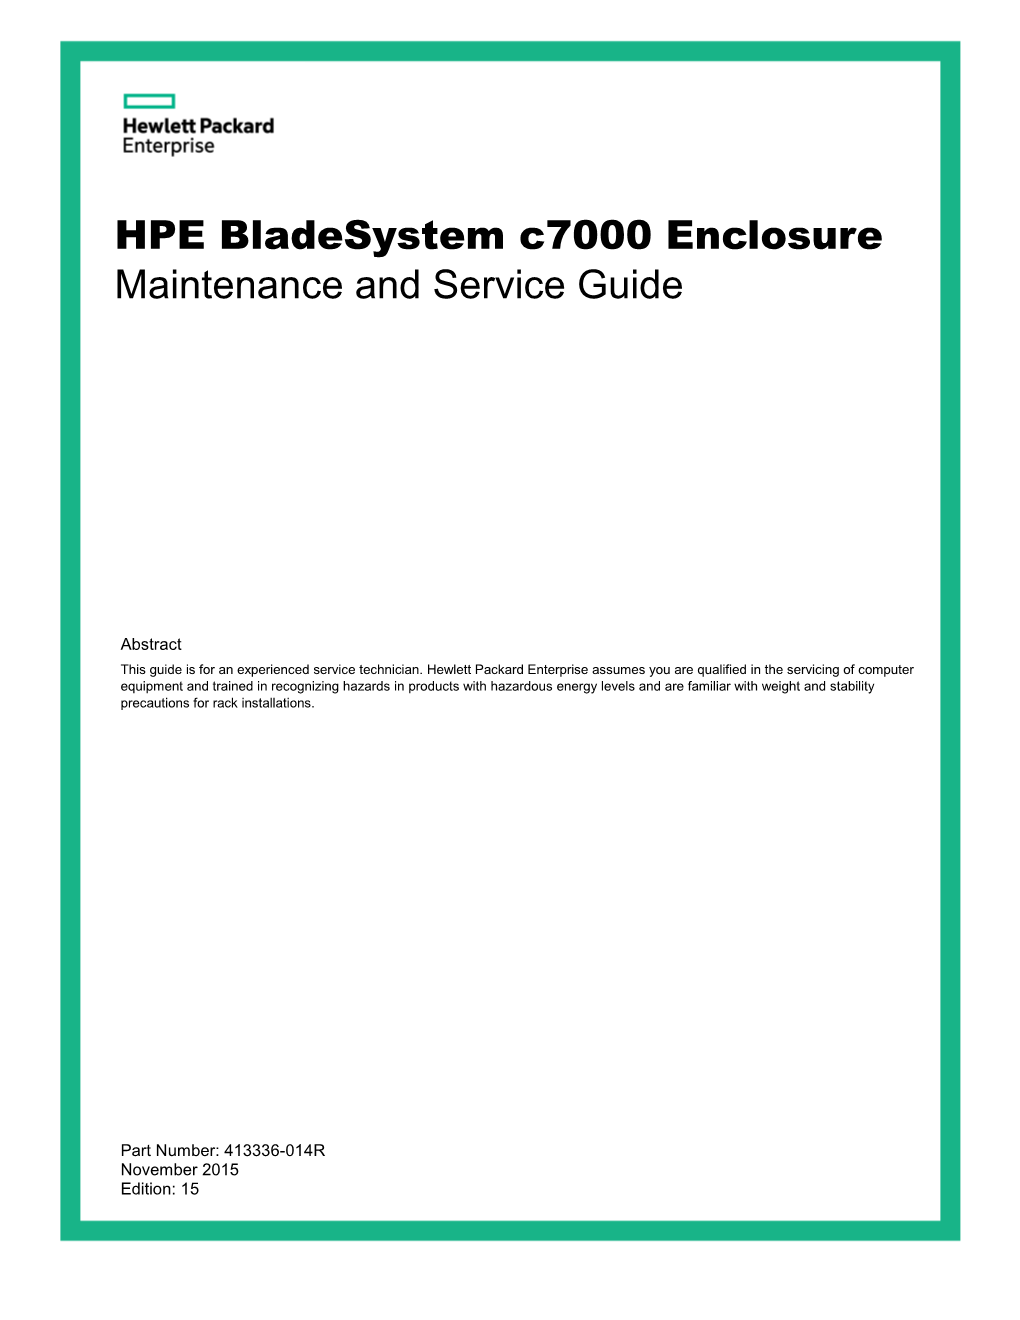 HPE Bladesystem C7000 Enclosure Maintenance and Service Guide